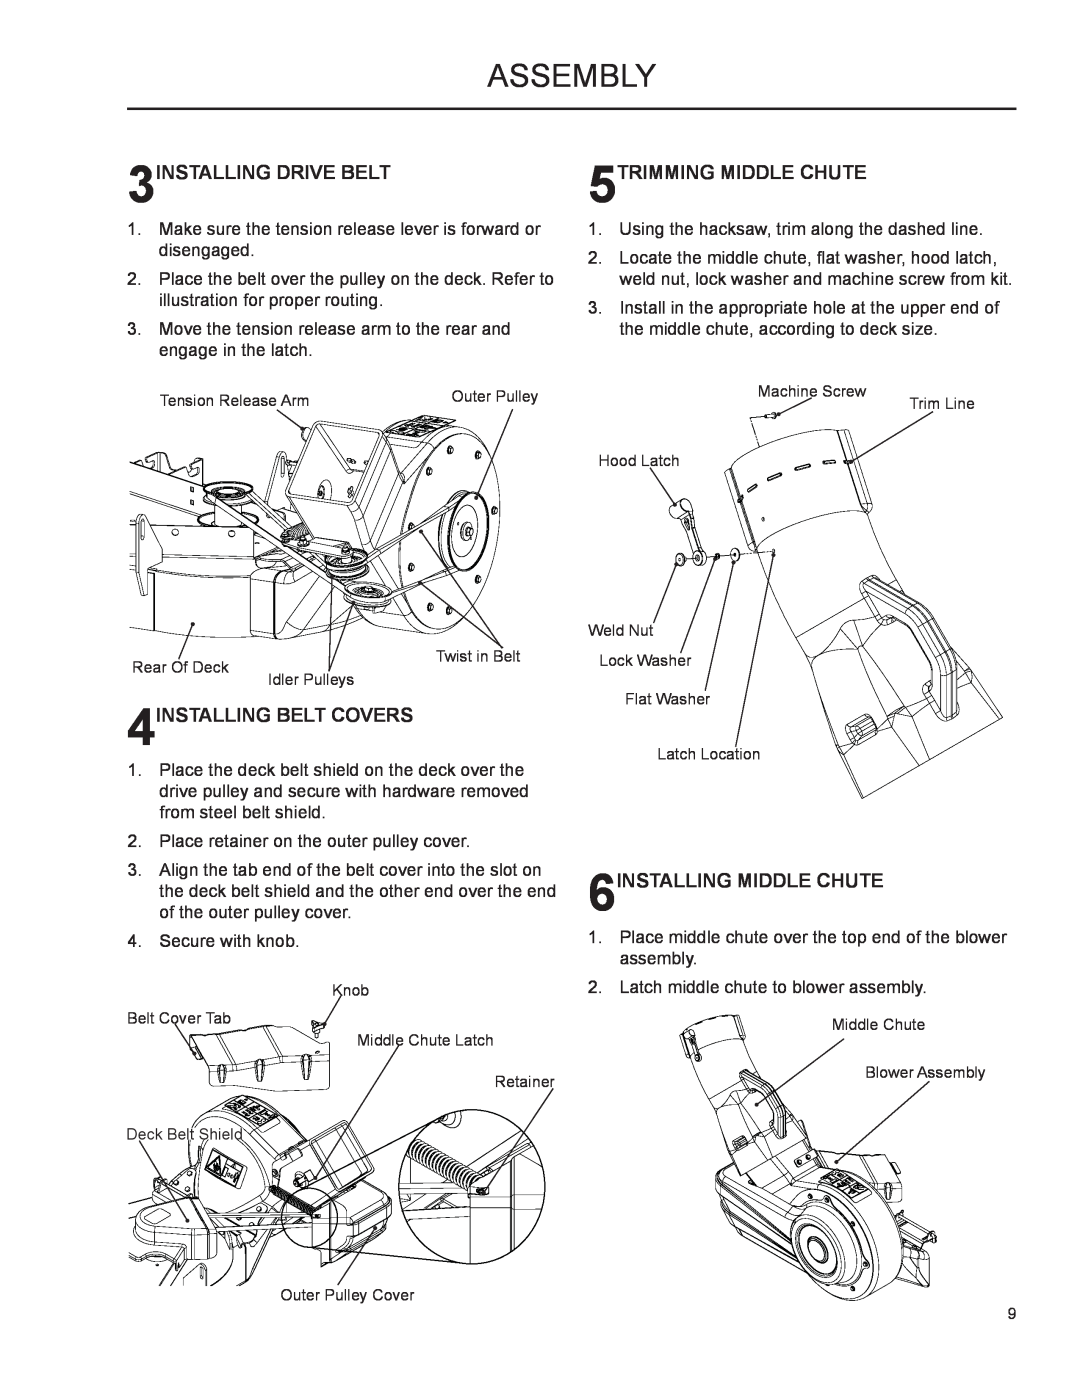 Husqvarna XOUS2009 manual 3INSTALLING DRIVE BELT, 5TRIMMING MIDDLE CHUTE, 4INSTALLING BELT COVERS, 6INSTALLING MIDDLE CHUTE 